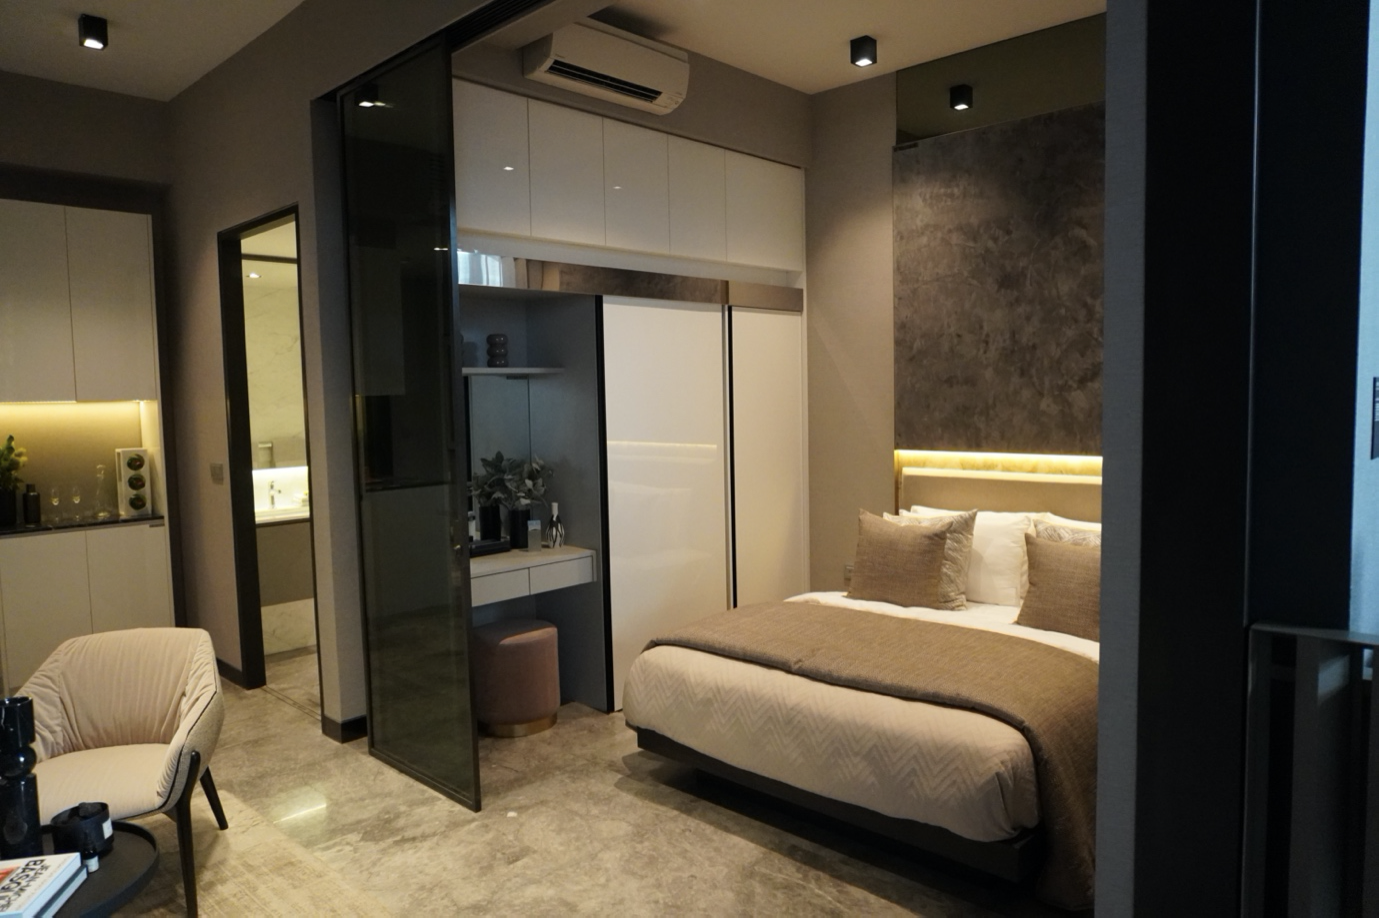 Sliding doors help to reduce space wastage.